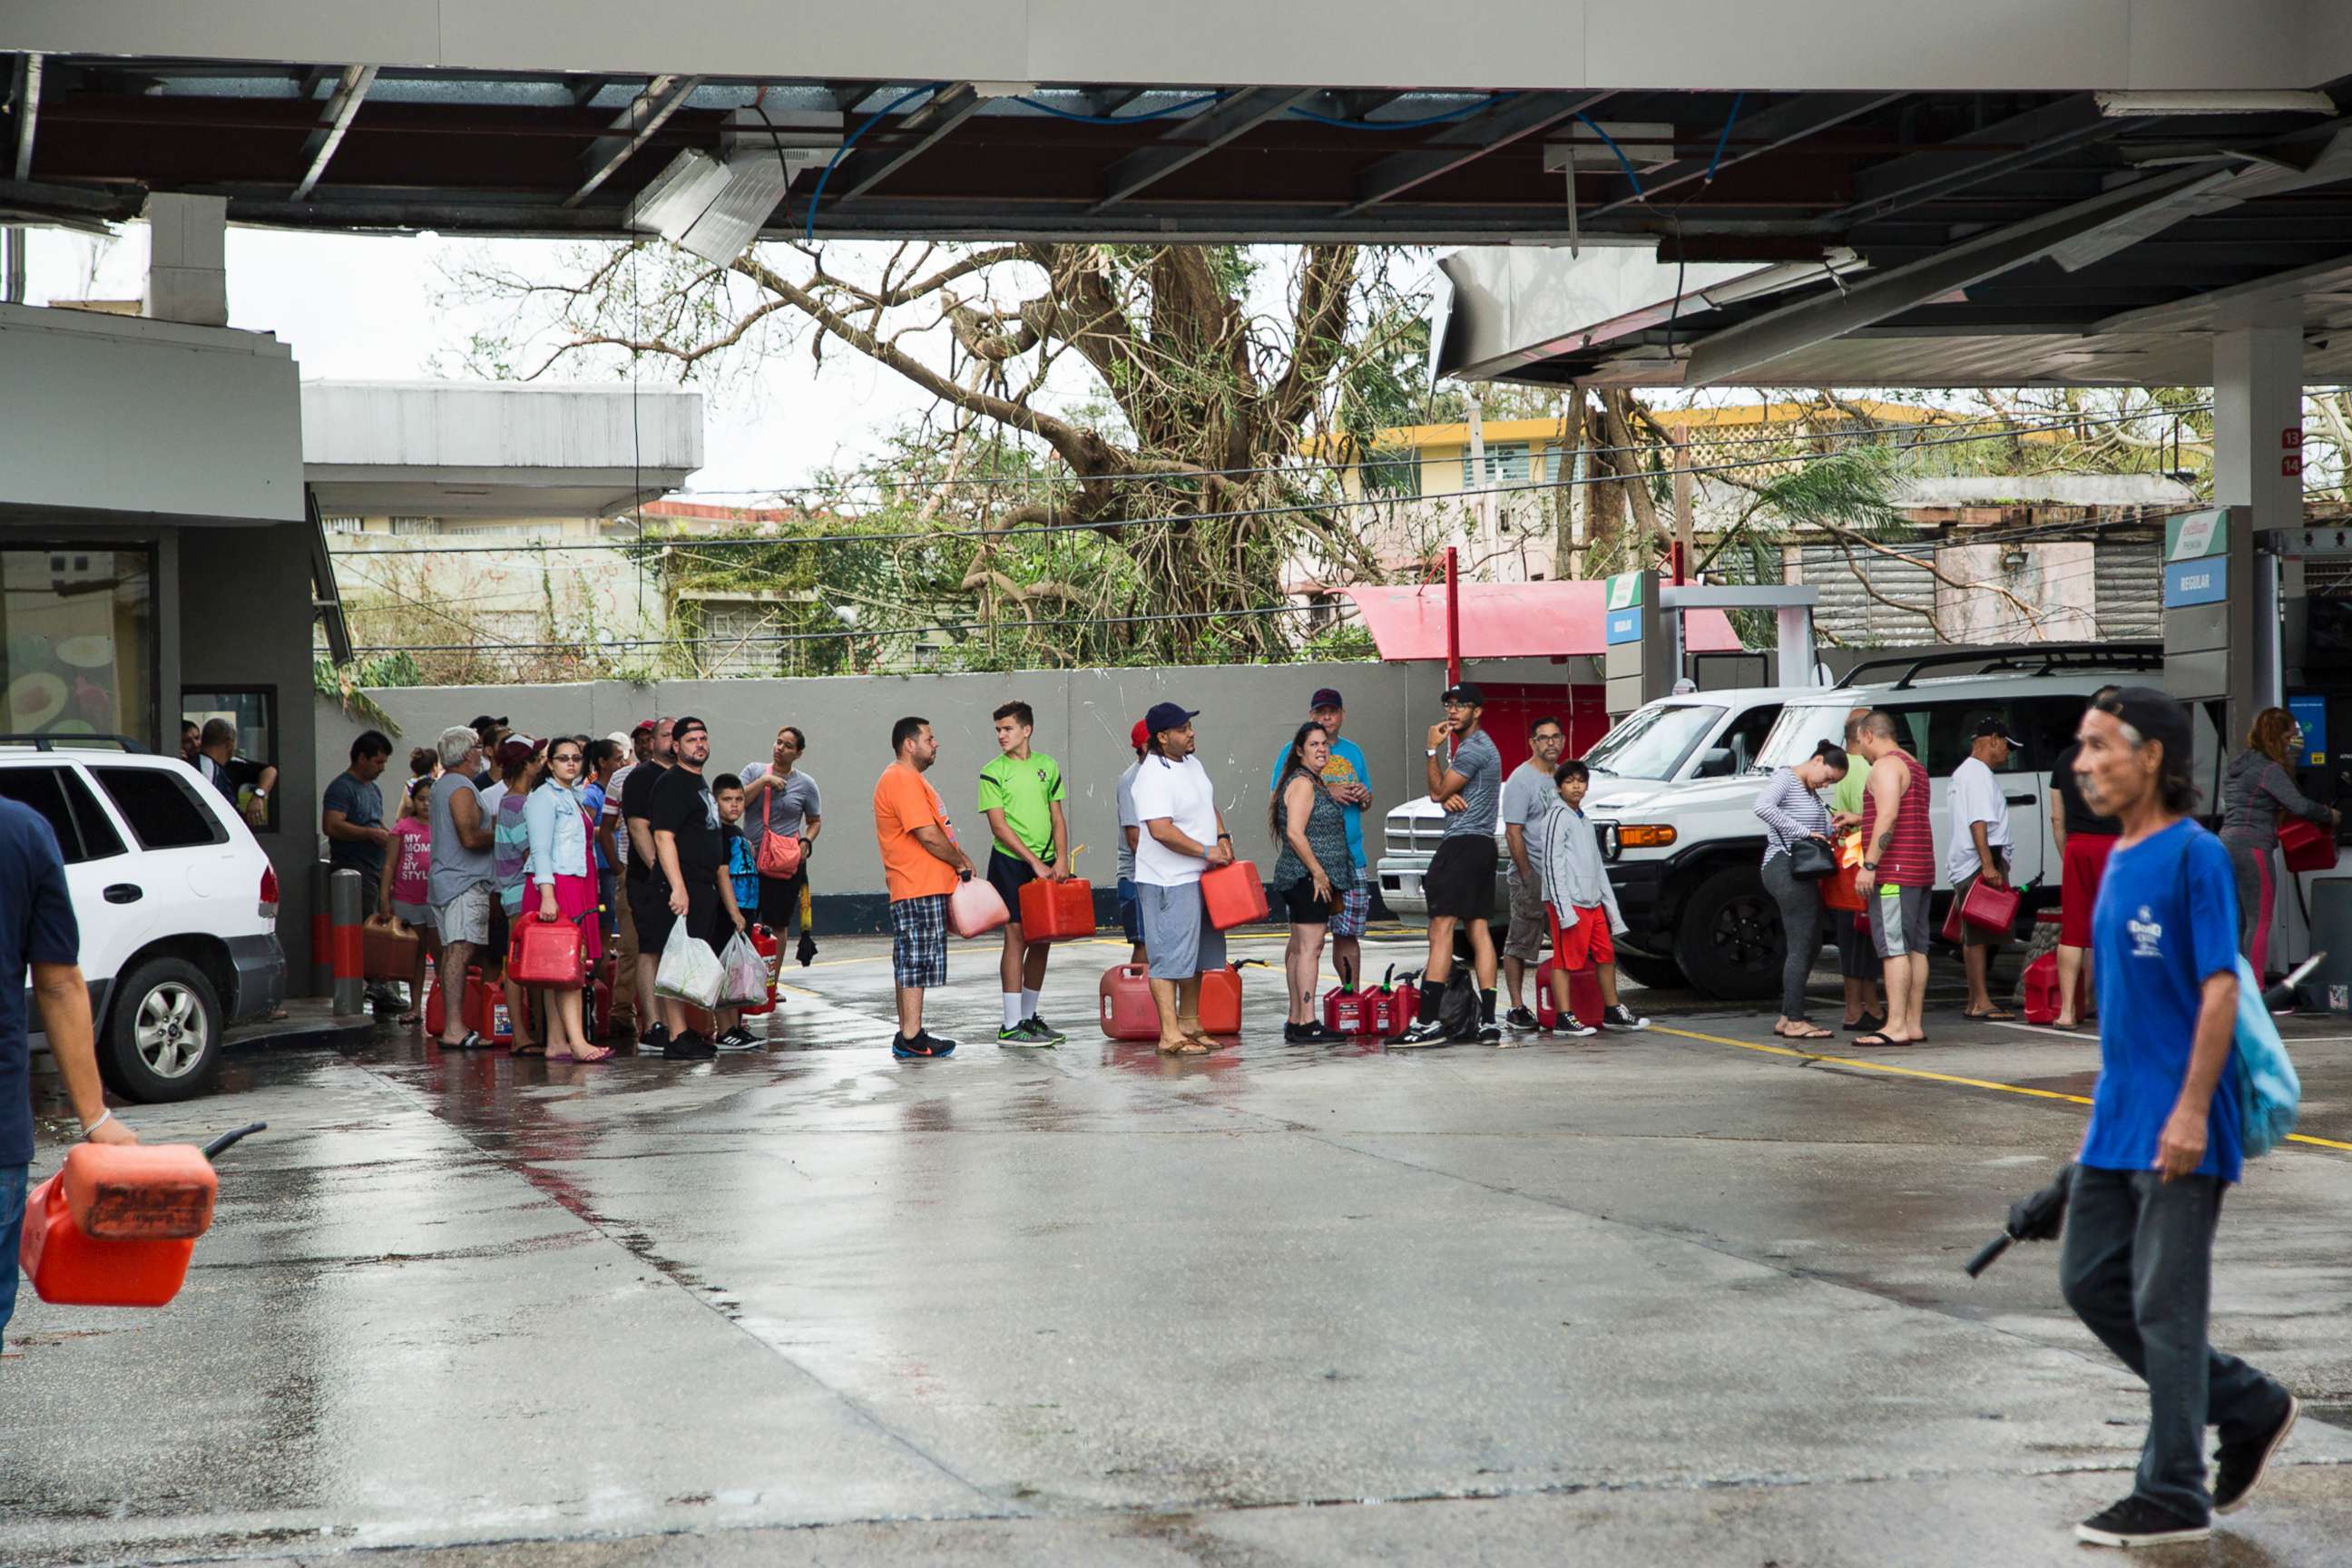 PHOTO: People line up to fill gas cans after Hurricane Maria in San Juan, Puerto Rico, Sept. 21, 2017.